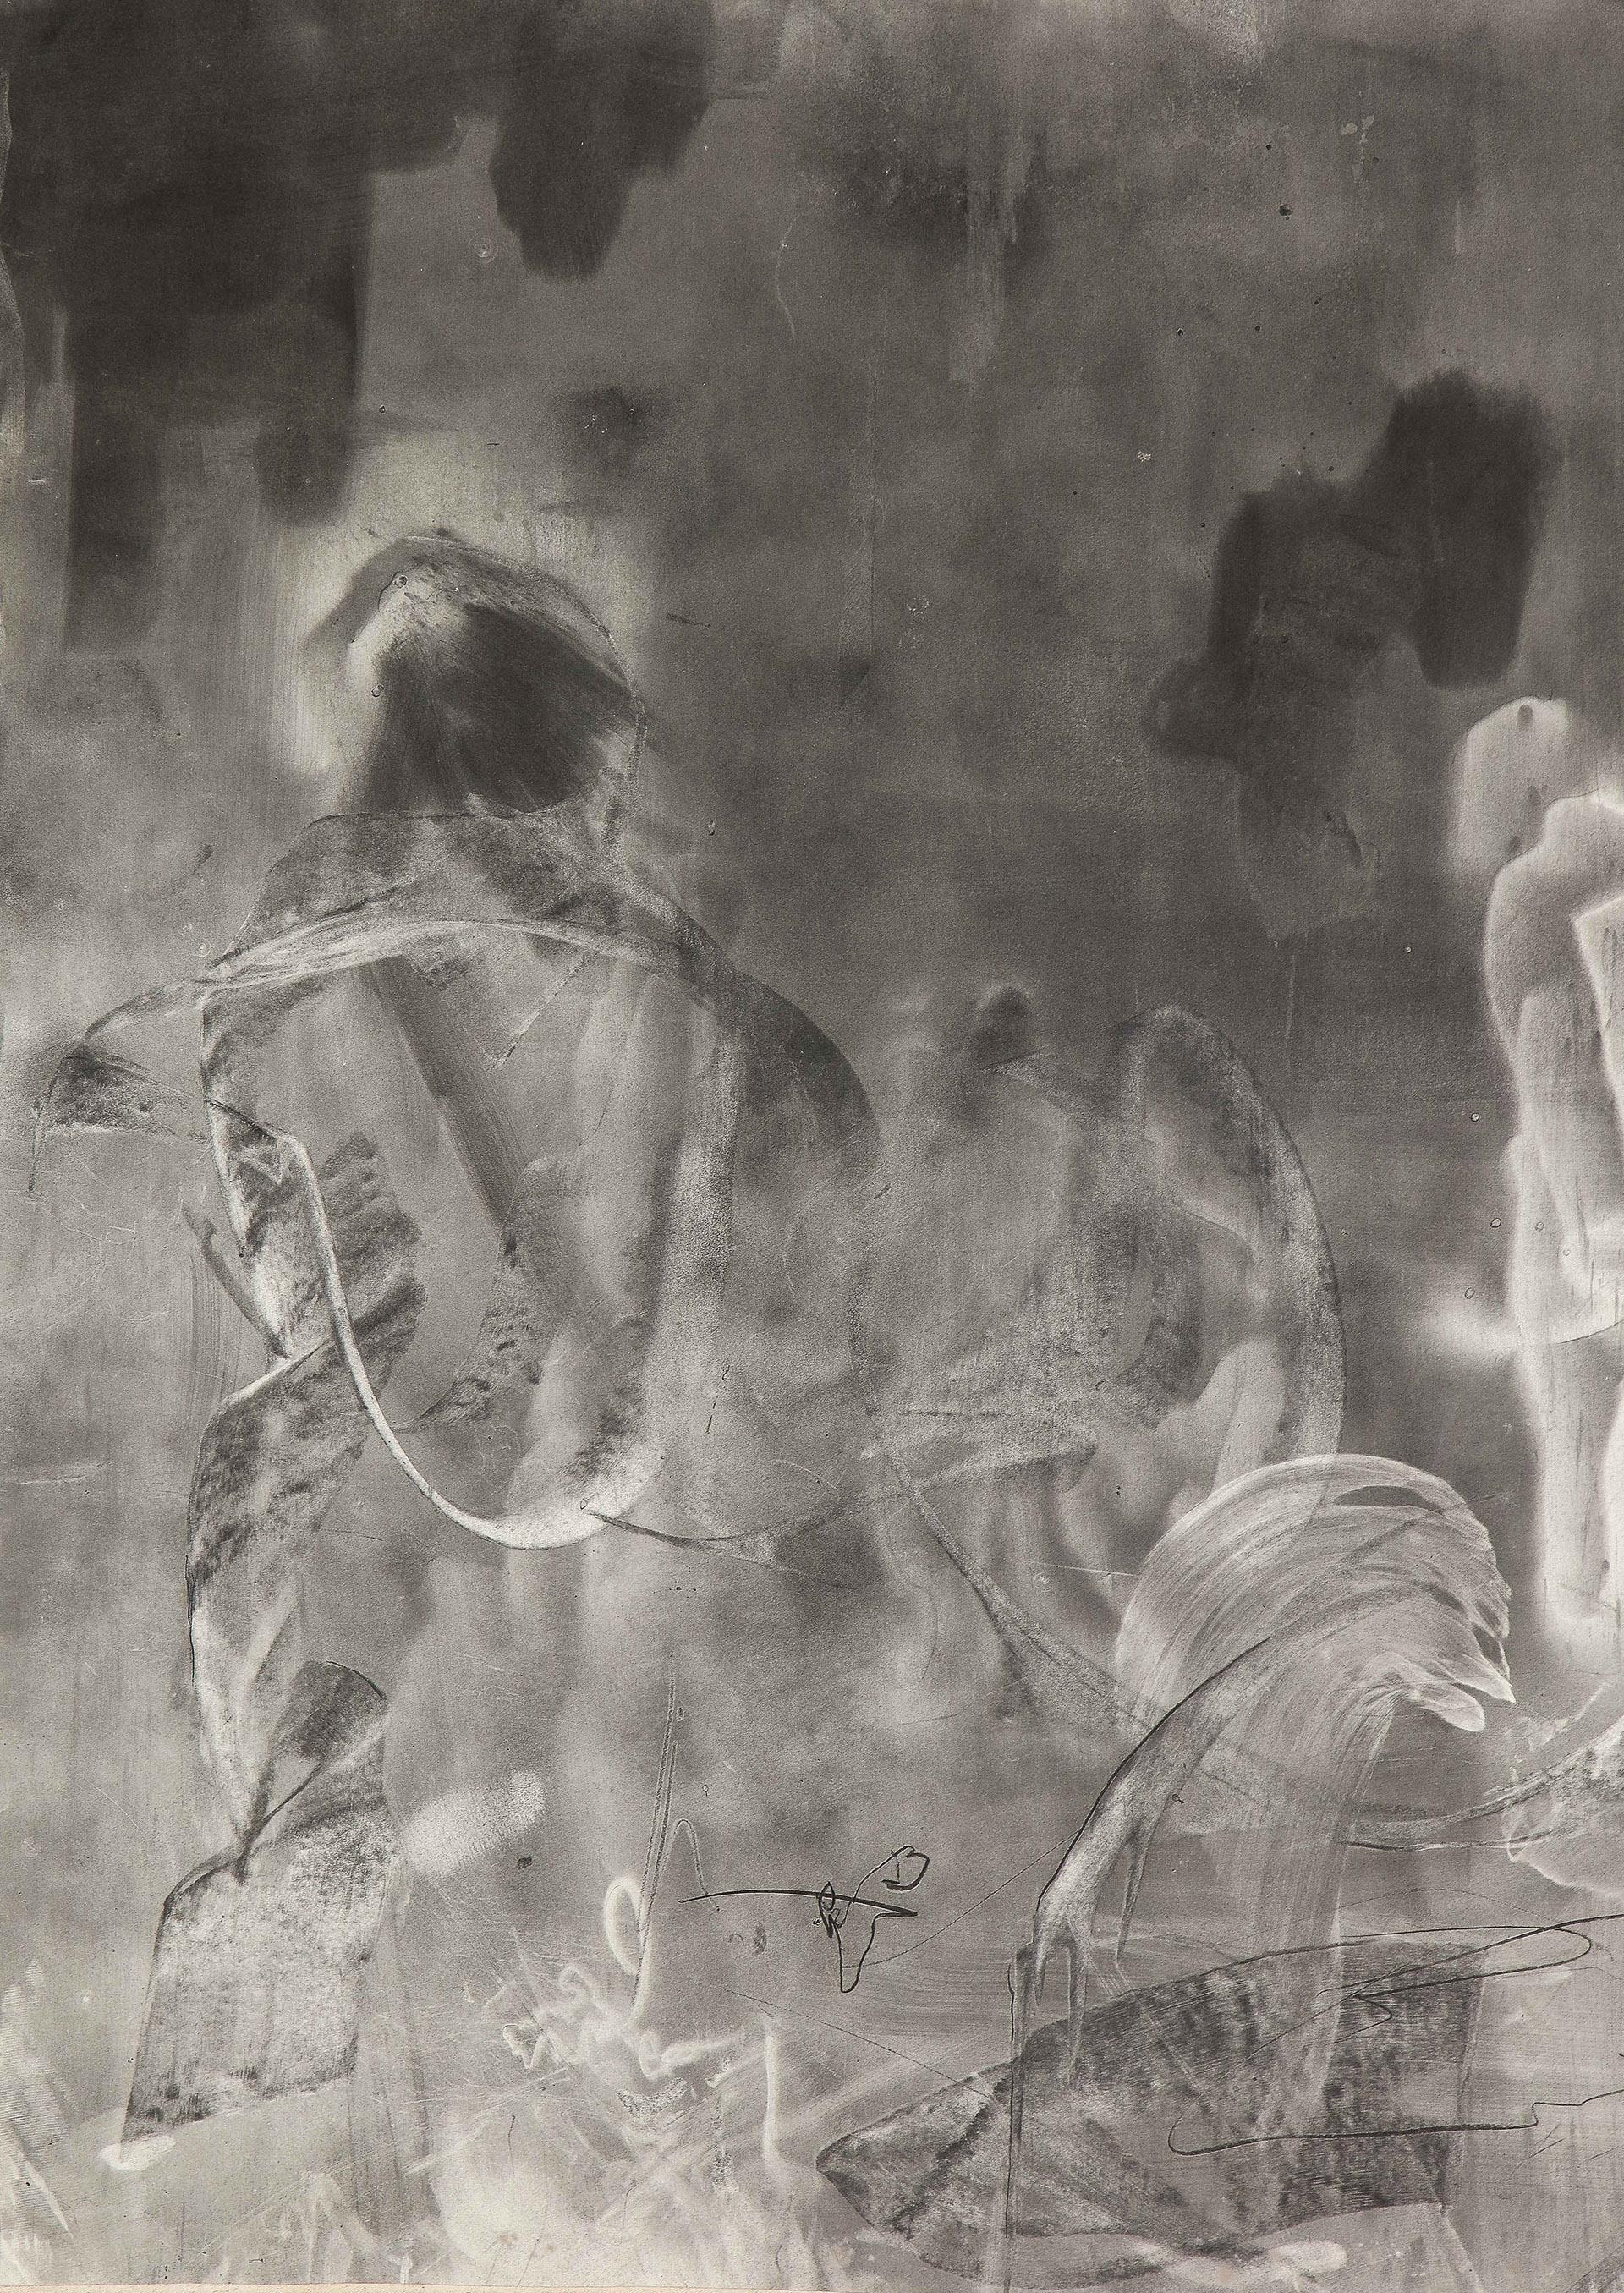 Charcoal on paper stretched to canvas and archivable spray fixed
Signed en verso